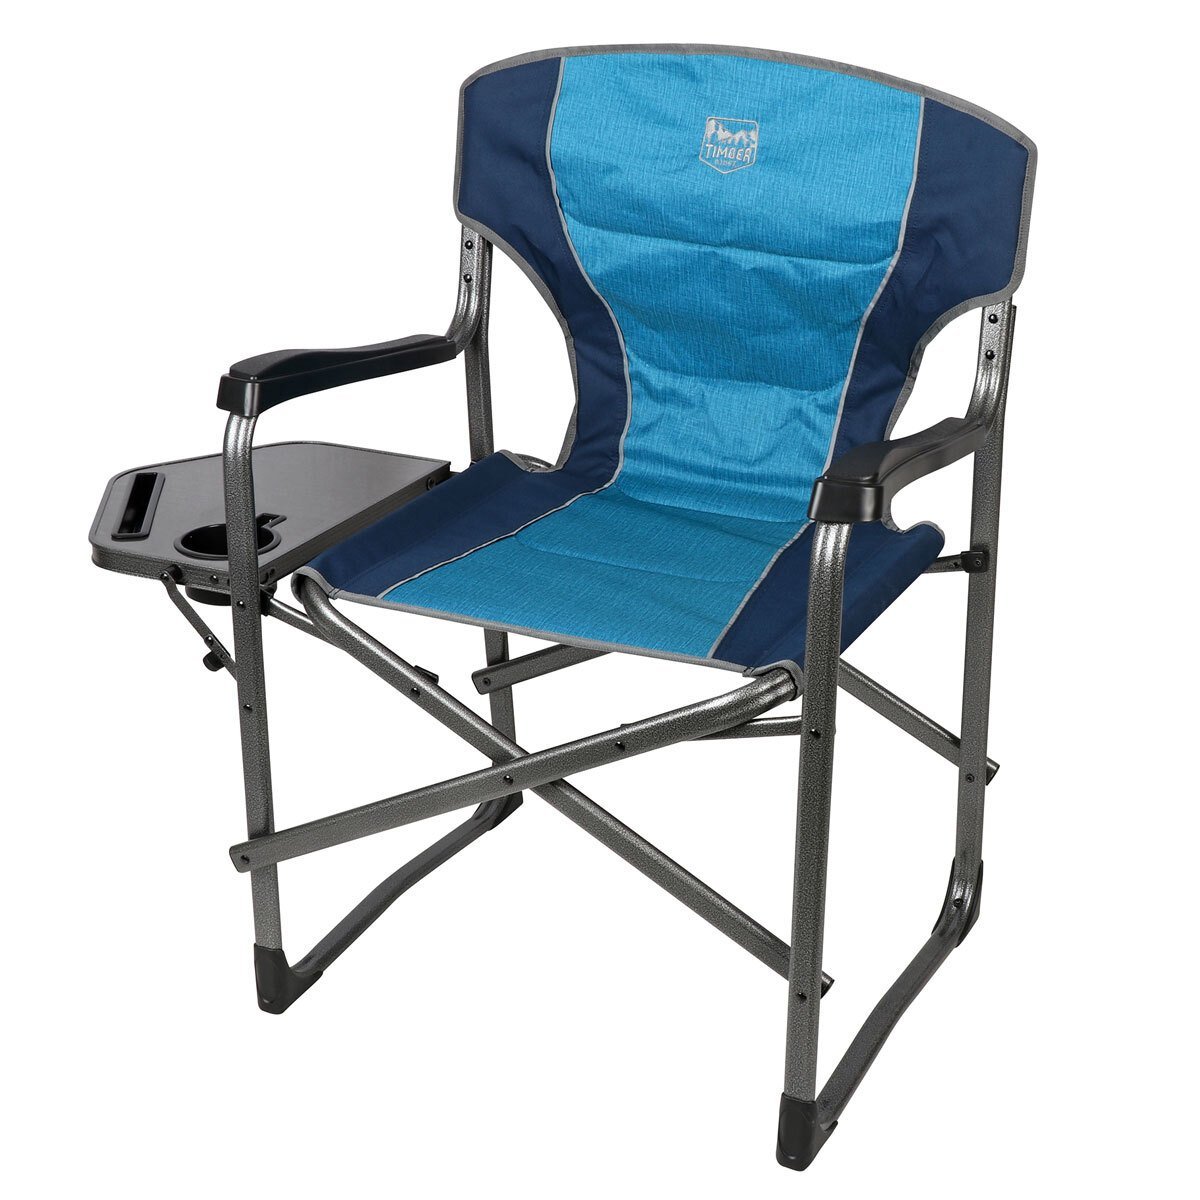 Timber Ridge Outdoor Director's Chair with Side TableTimber Ridge Outdoor Director's Chair with Side Table - Signature Retail Stores